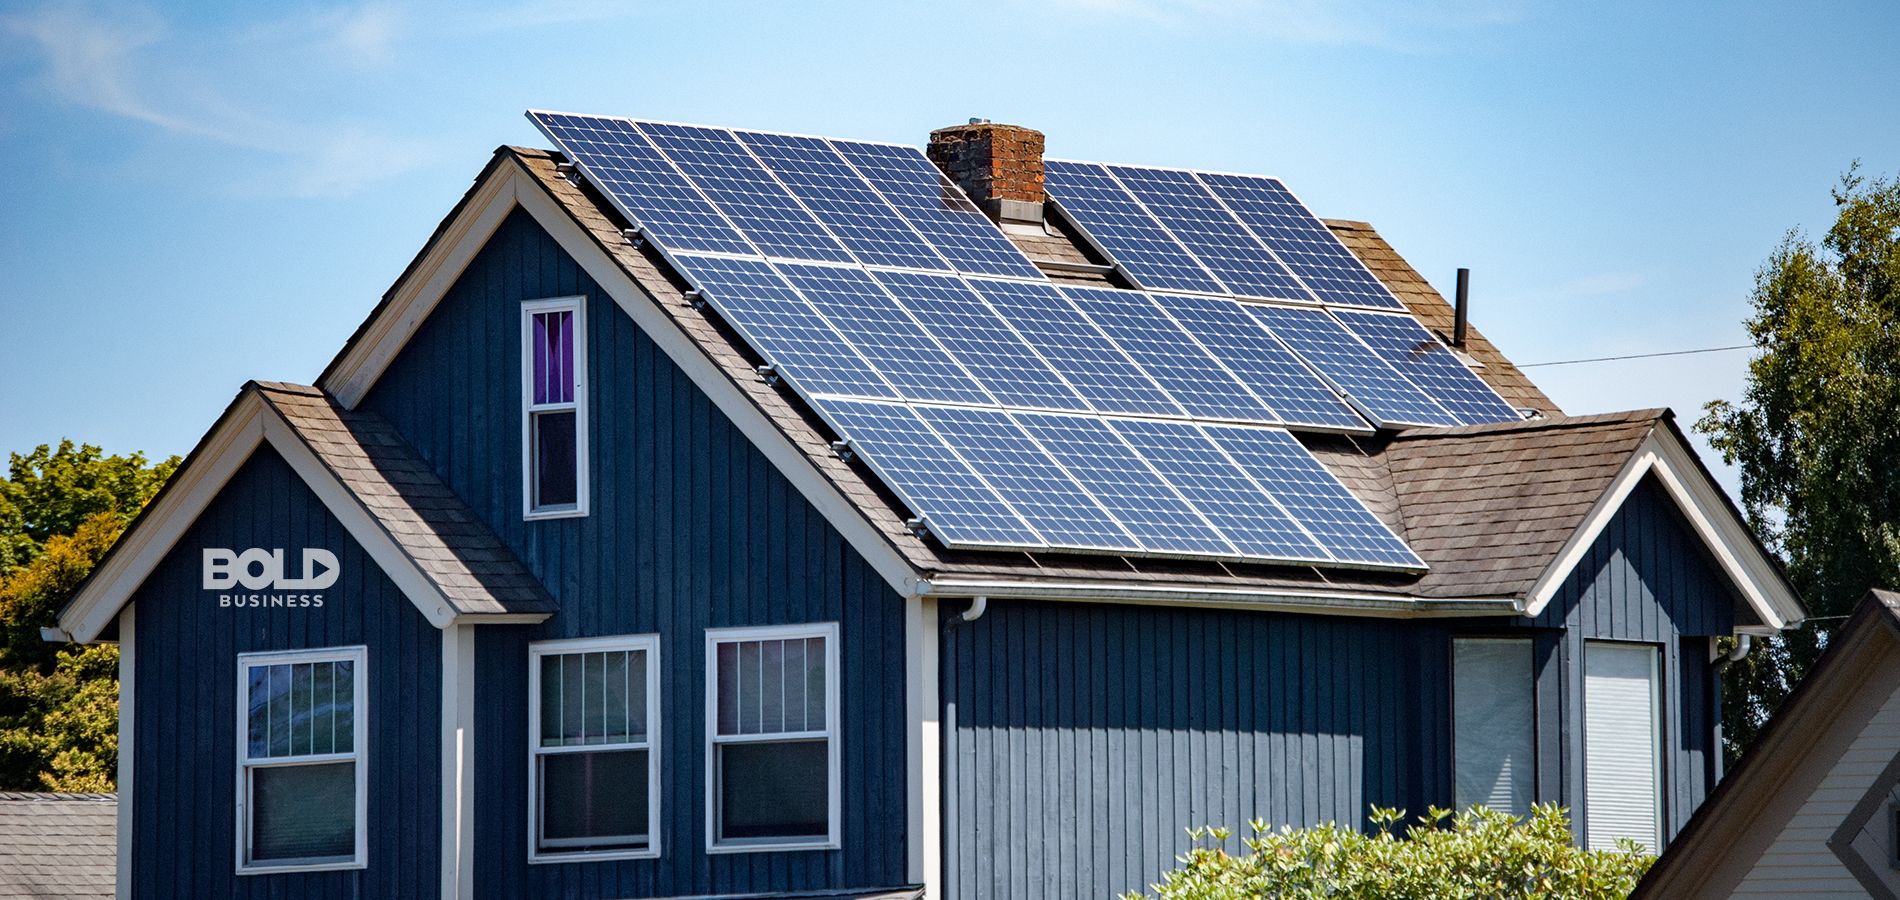 Tesla Rooftop Solar Shingles Are Ready to Make a Promising Bold Impact!